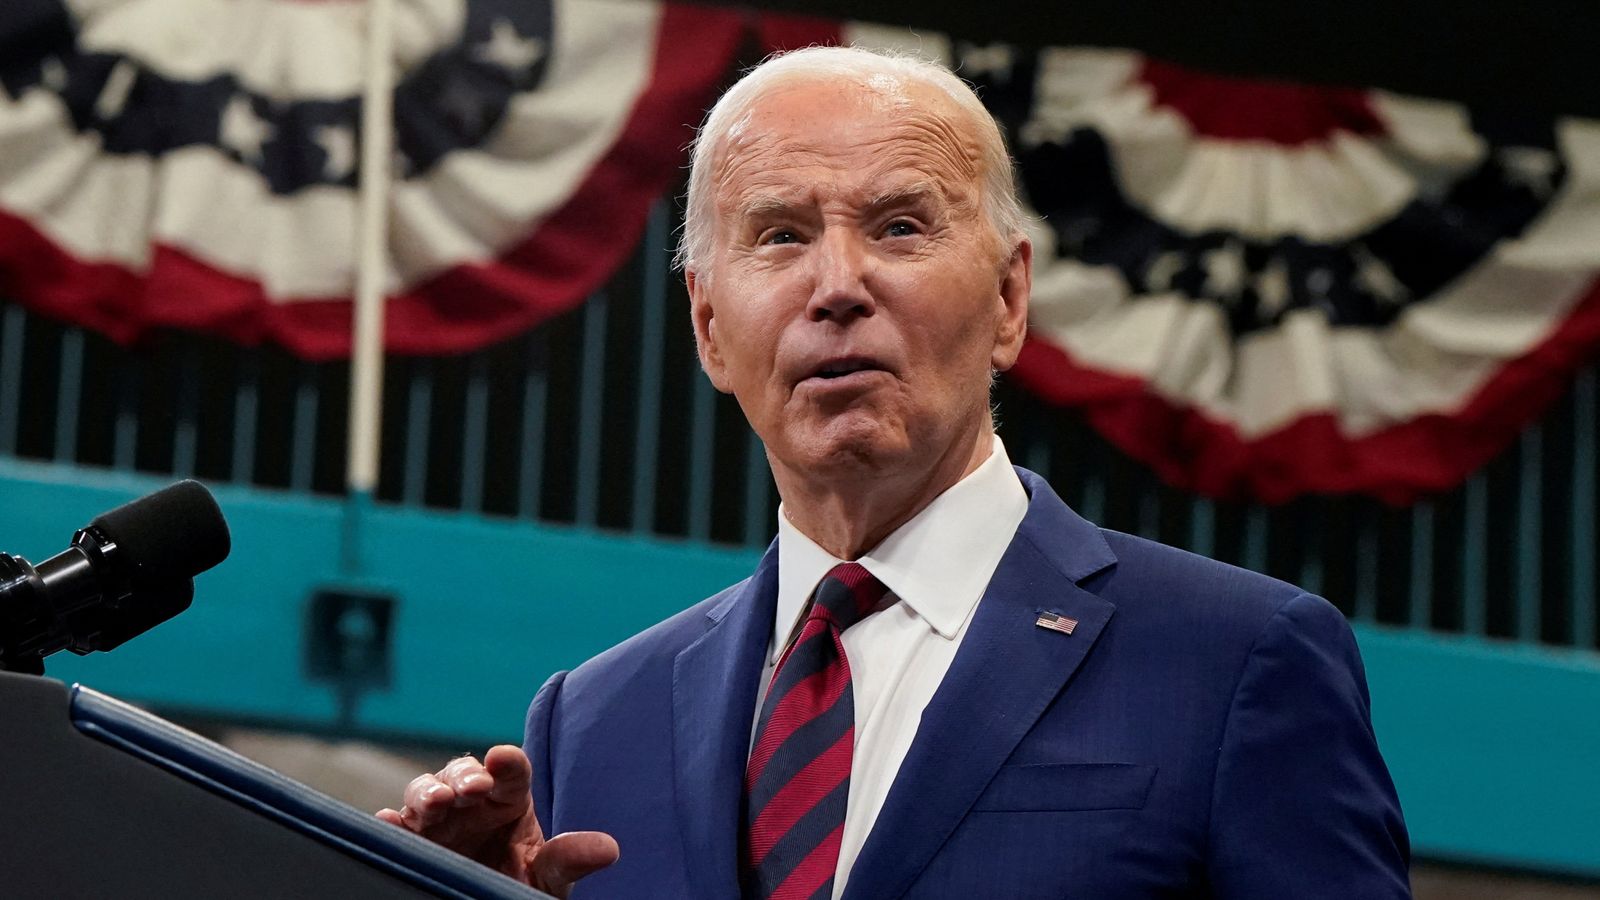 'They have a point': Pro-Palestinian protesters interrupt Biden mid-speech